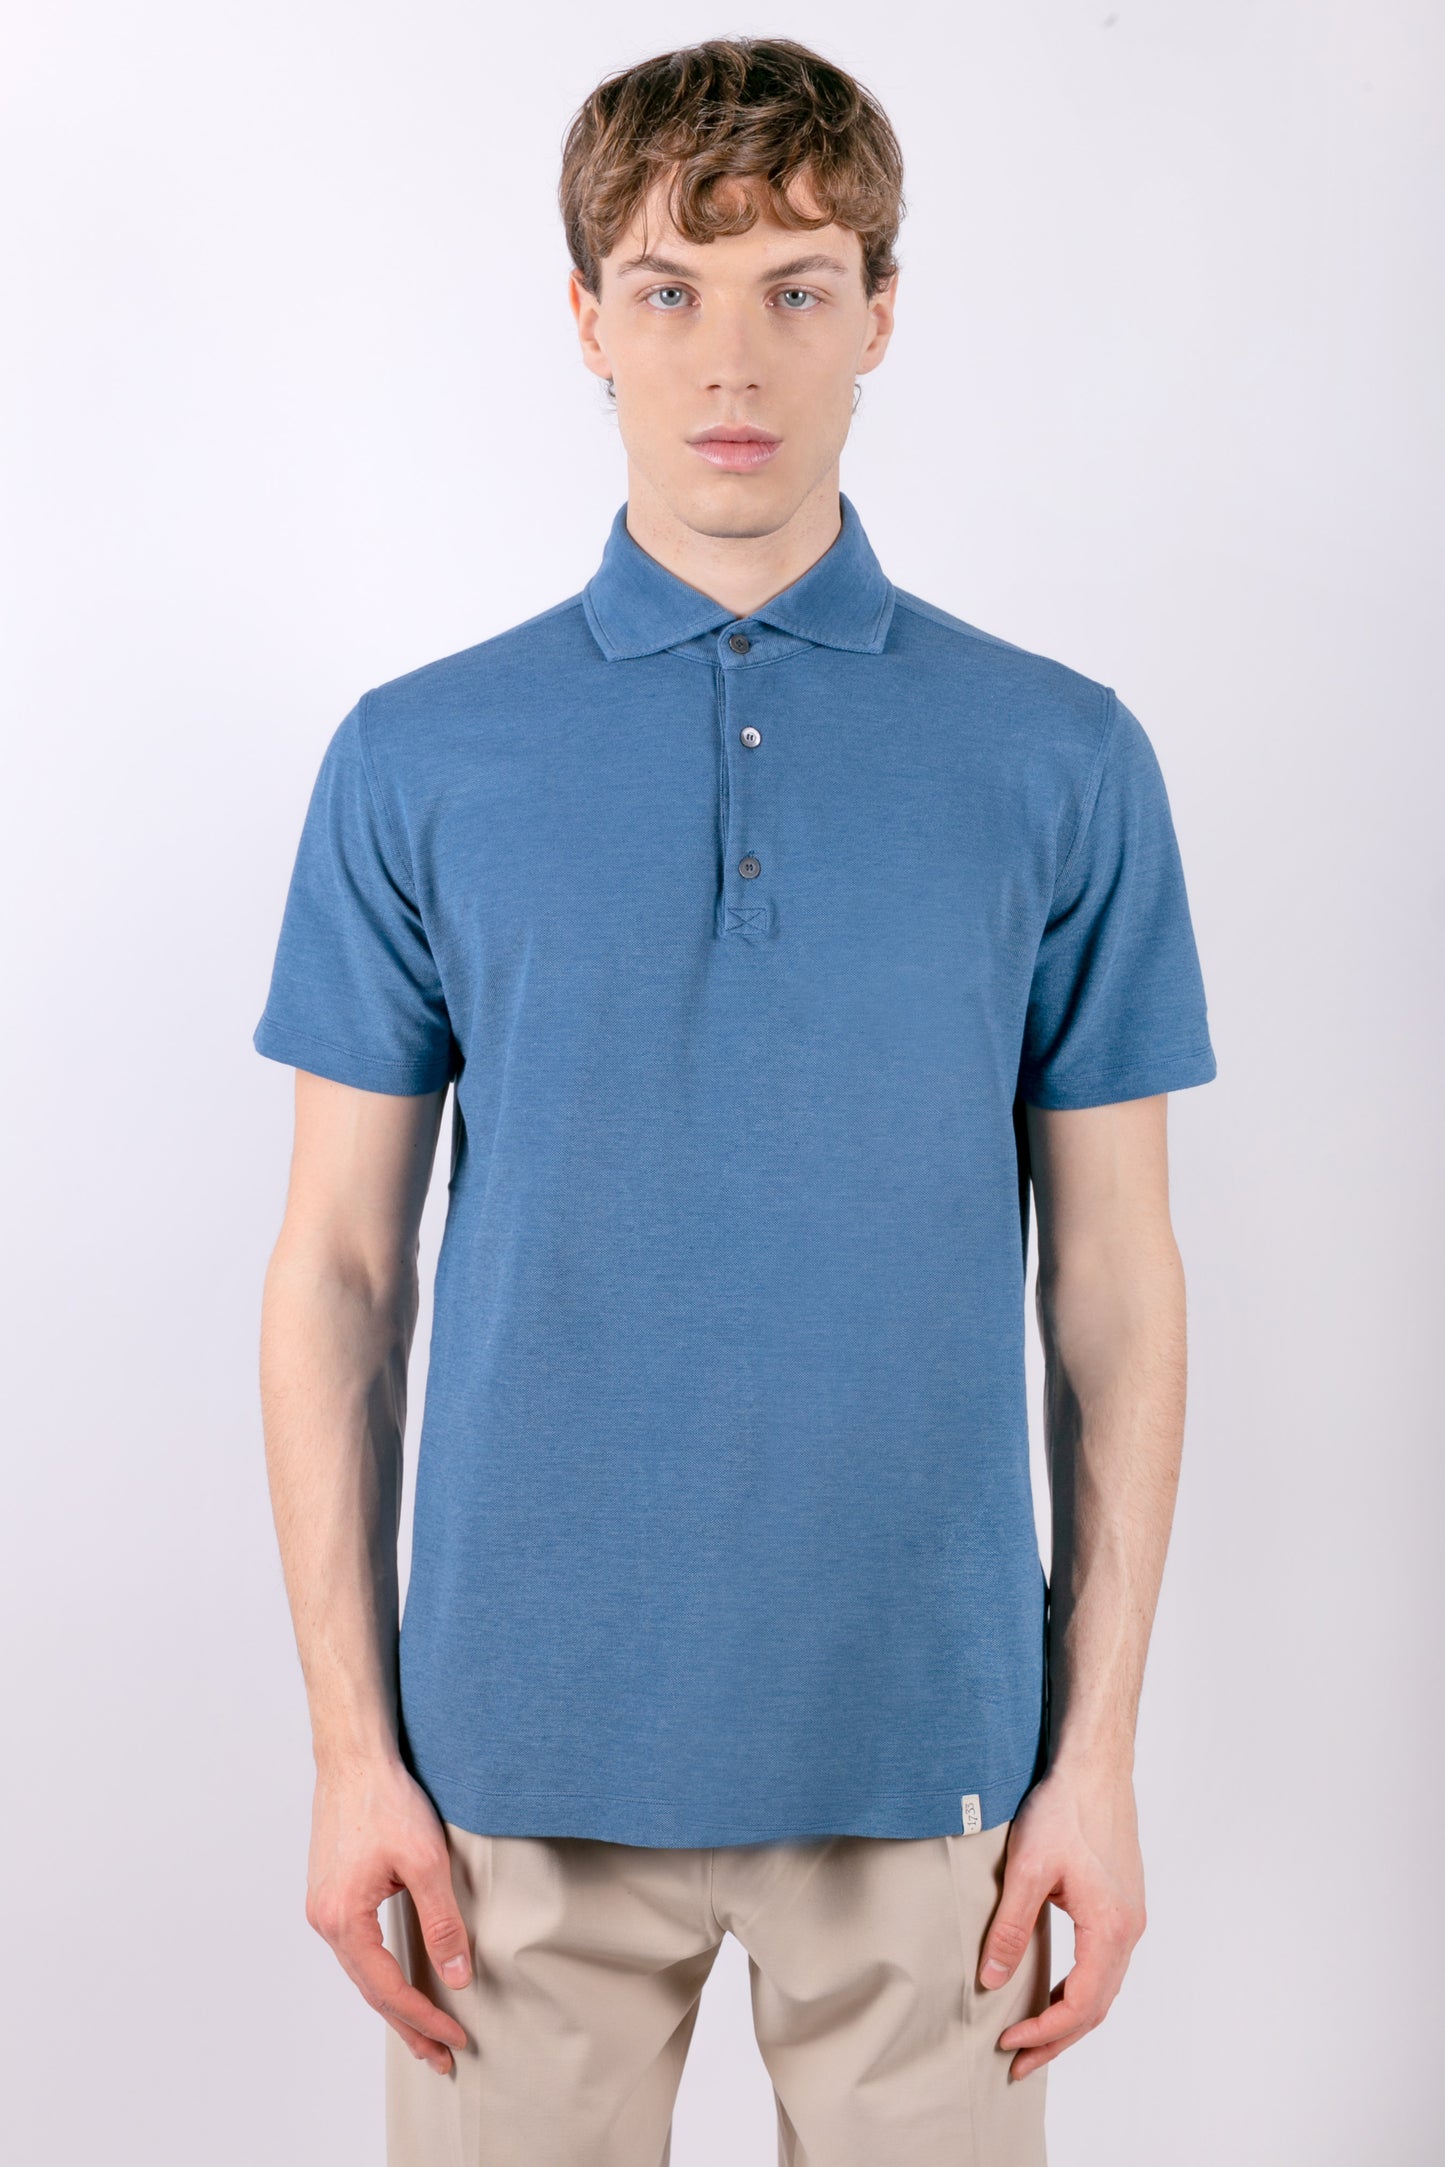 Short-sleeved polo shirt in light blue piqué with 3 buttons